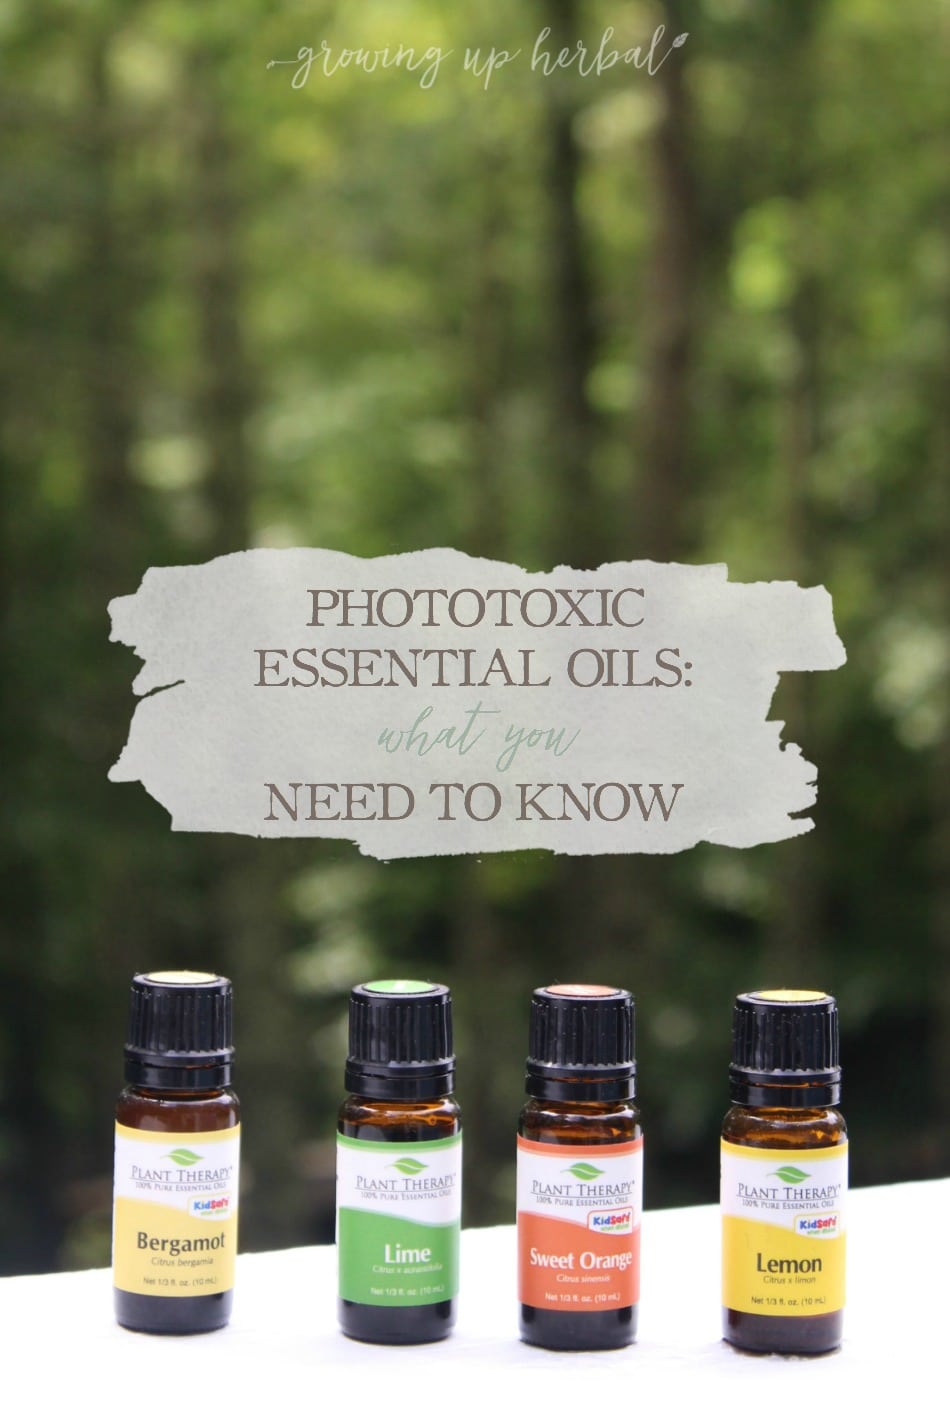 Phototoxic Essential Oils: What You Need To Know | Growing Up Herbal | Learn how to use essential oils safely this summer, especially when it comes to navigating the use of phototoxic essential oils!